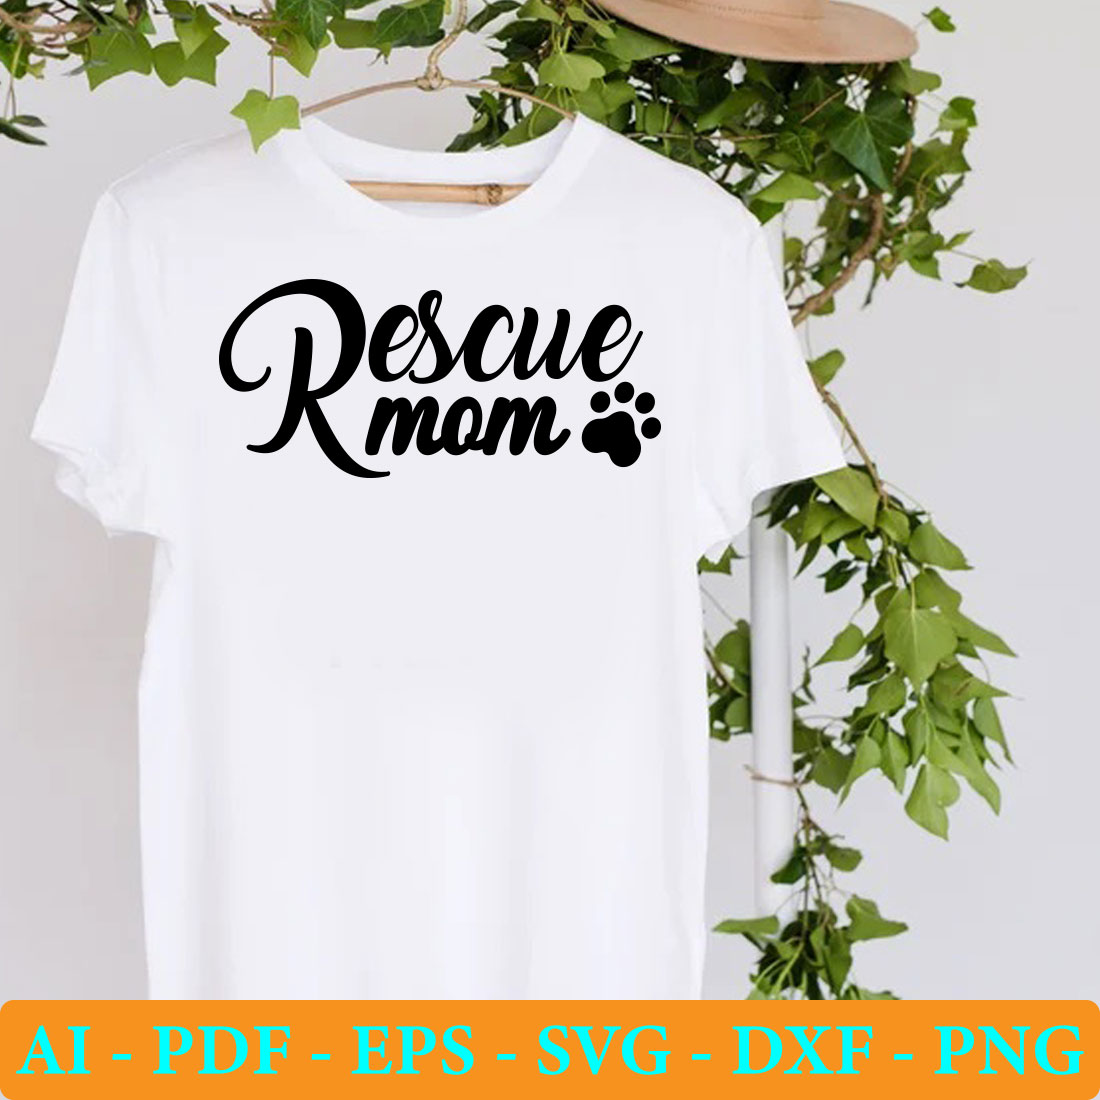 T - shirt that says rescue mom with a paw on it.